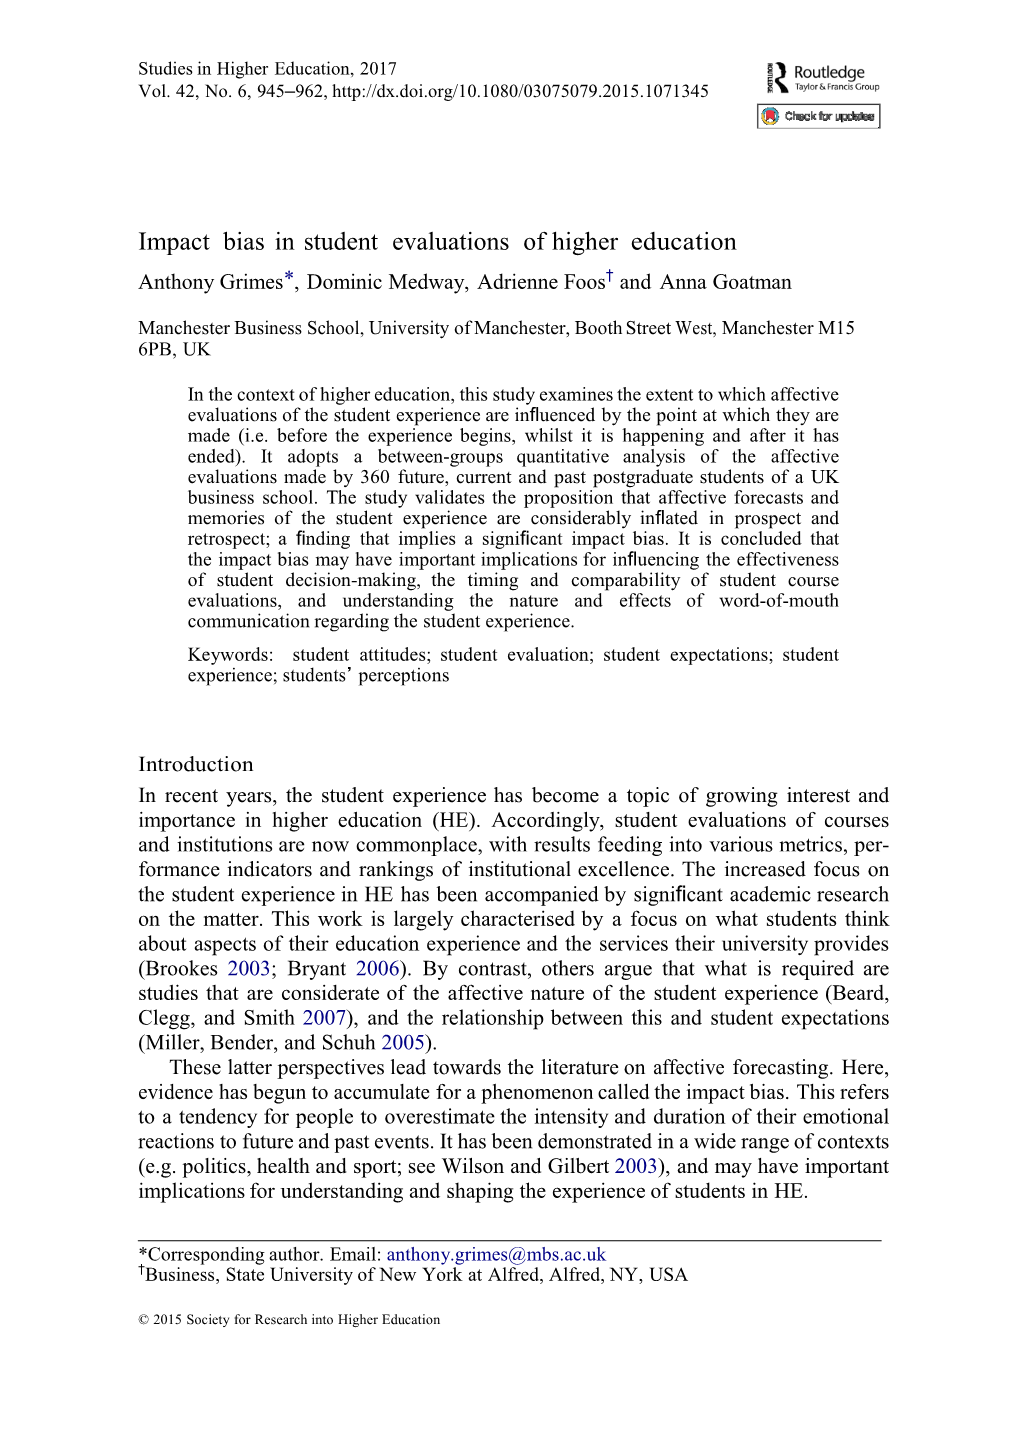 Impact Bias in Student Evaluations of Higher Education Anthony Grimes*, Dominic Medway, Adrienne Foos† and Anna Goatman